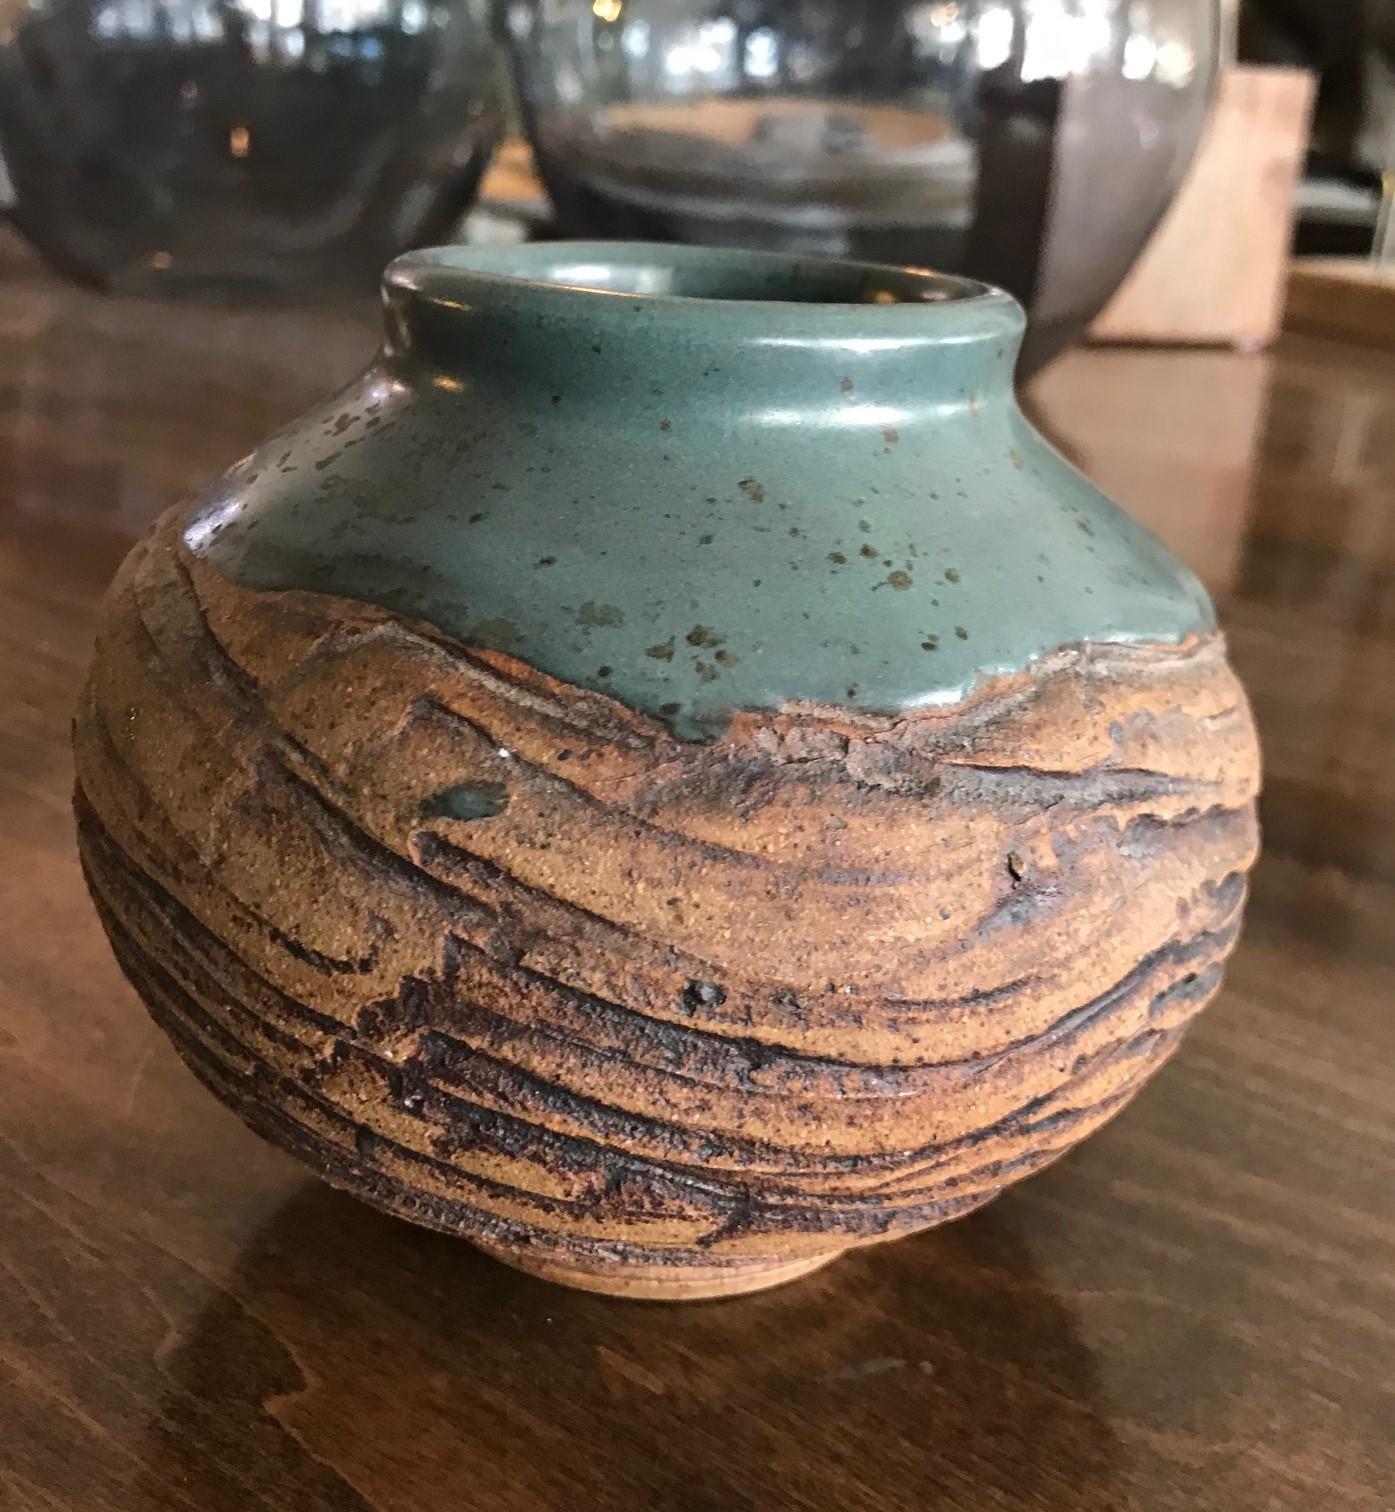 A gorgeous, midcentury pottery vase by renowned master potter F. Carlton Ball.

Ball, who studied with Glen Lukens, taught at University of Southern California between 1956-1967 and later at University of Puget Sound, Tacoma, Washington from